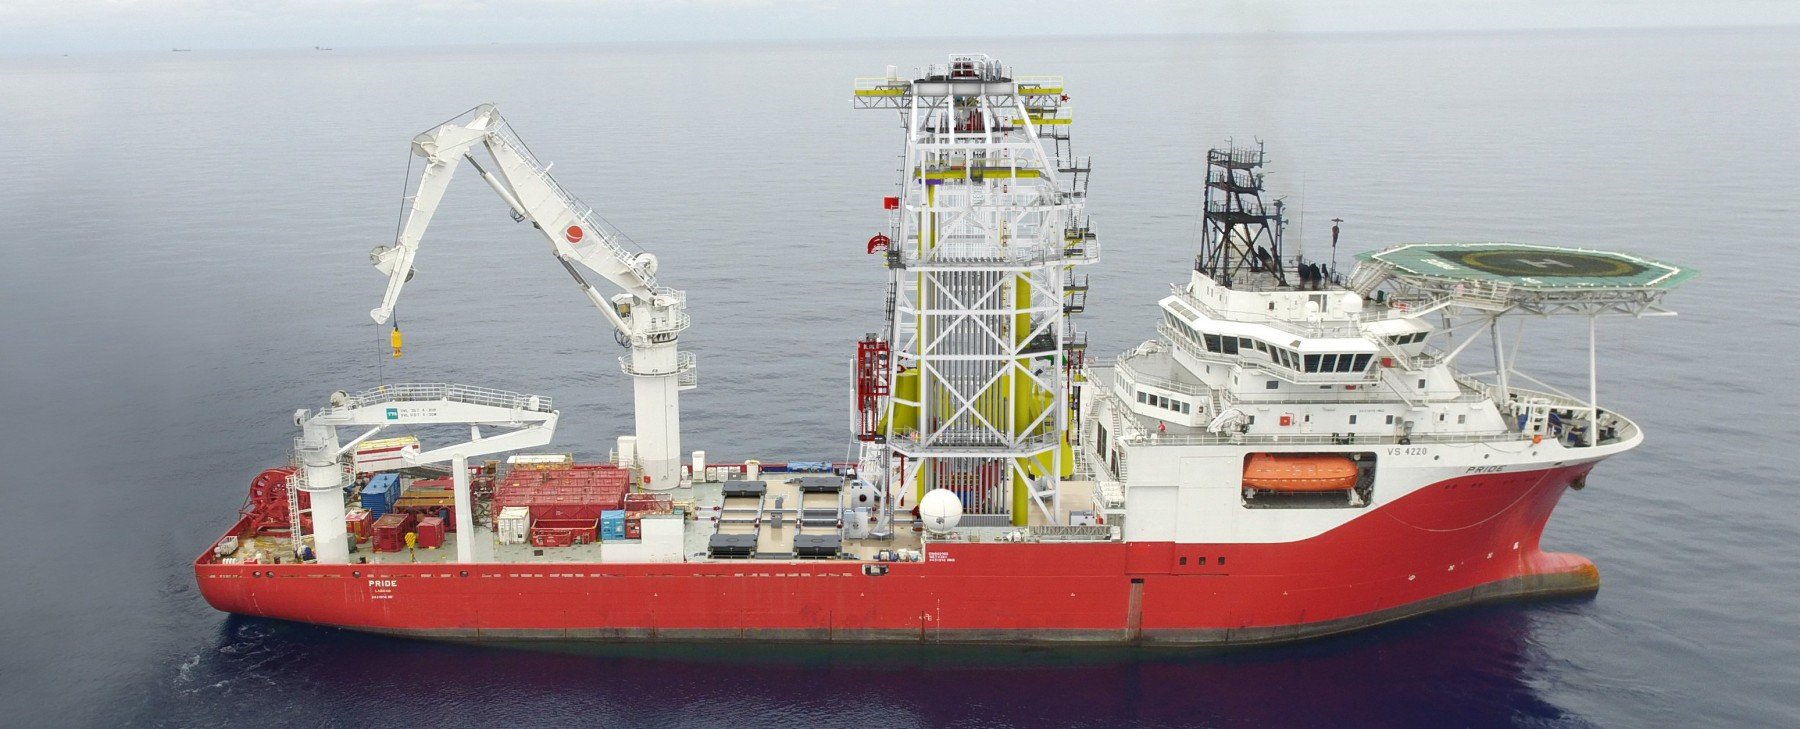 Osbit to provide well intervention system for FTAI Ocean